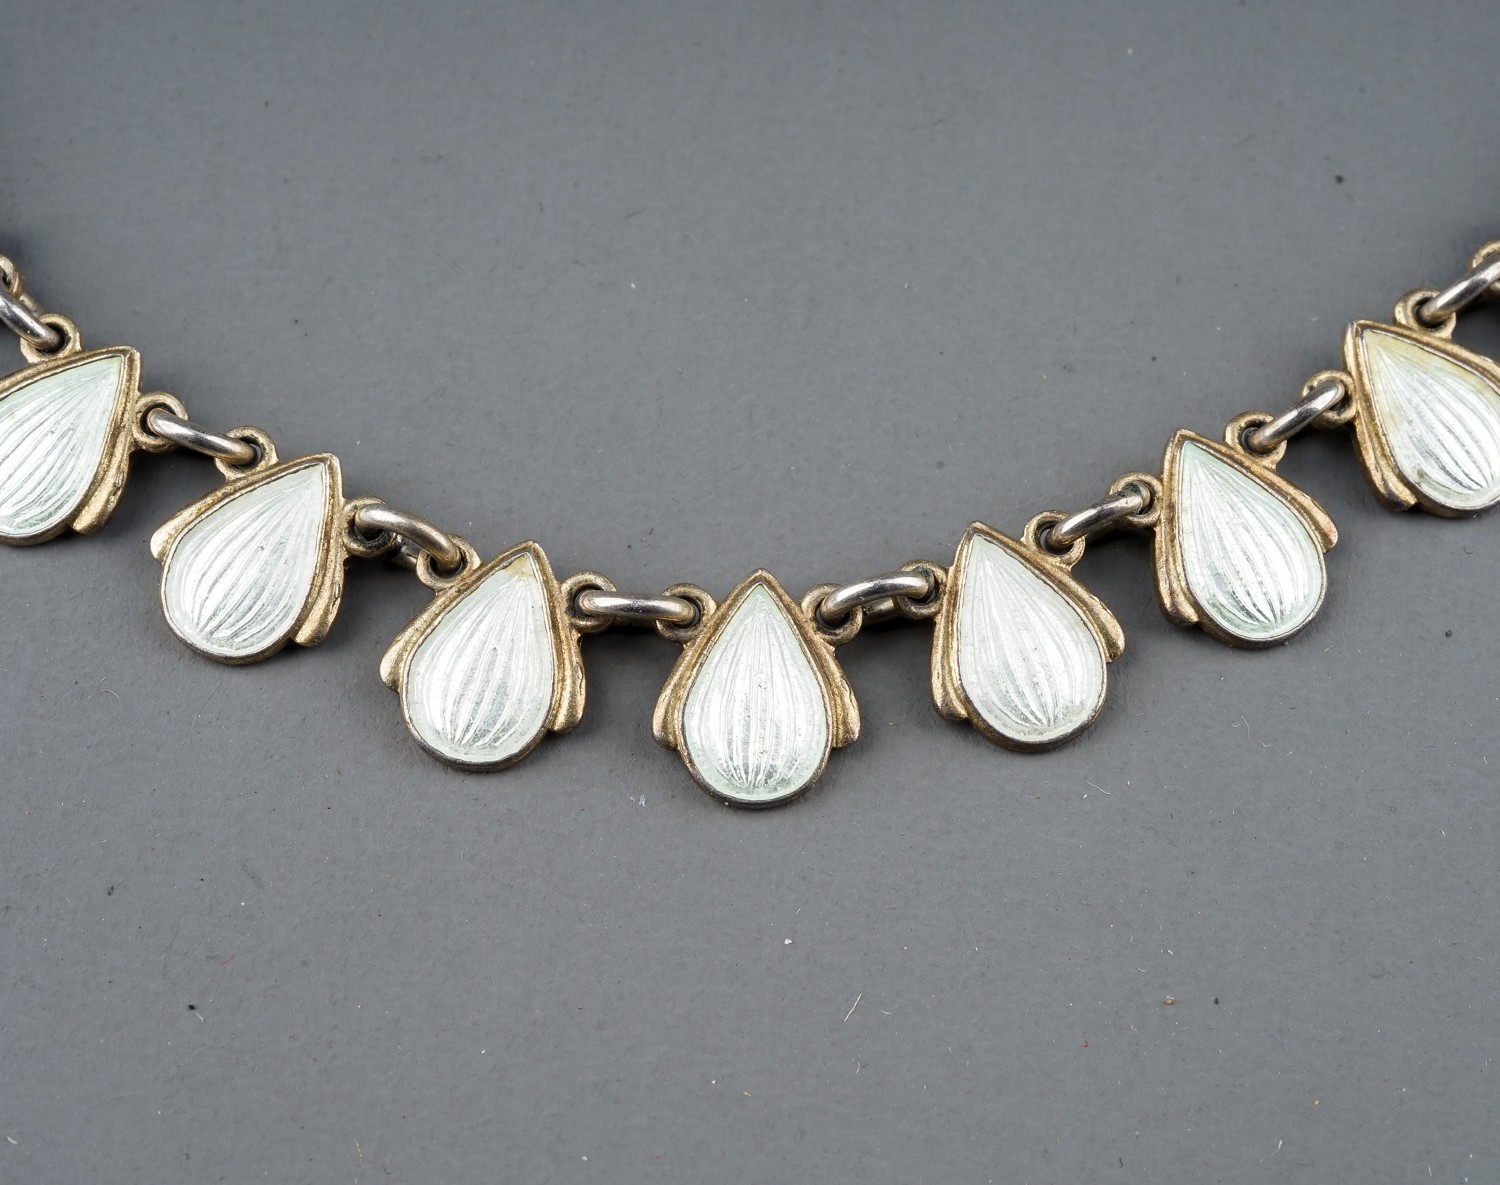 A Danish silver and enamel necklace, silver enamel pear-shape drops, indistinctly marked 'W?.B' - Image 5 of 8